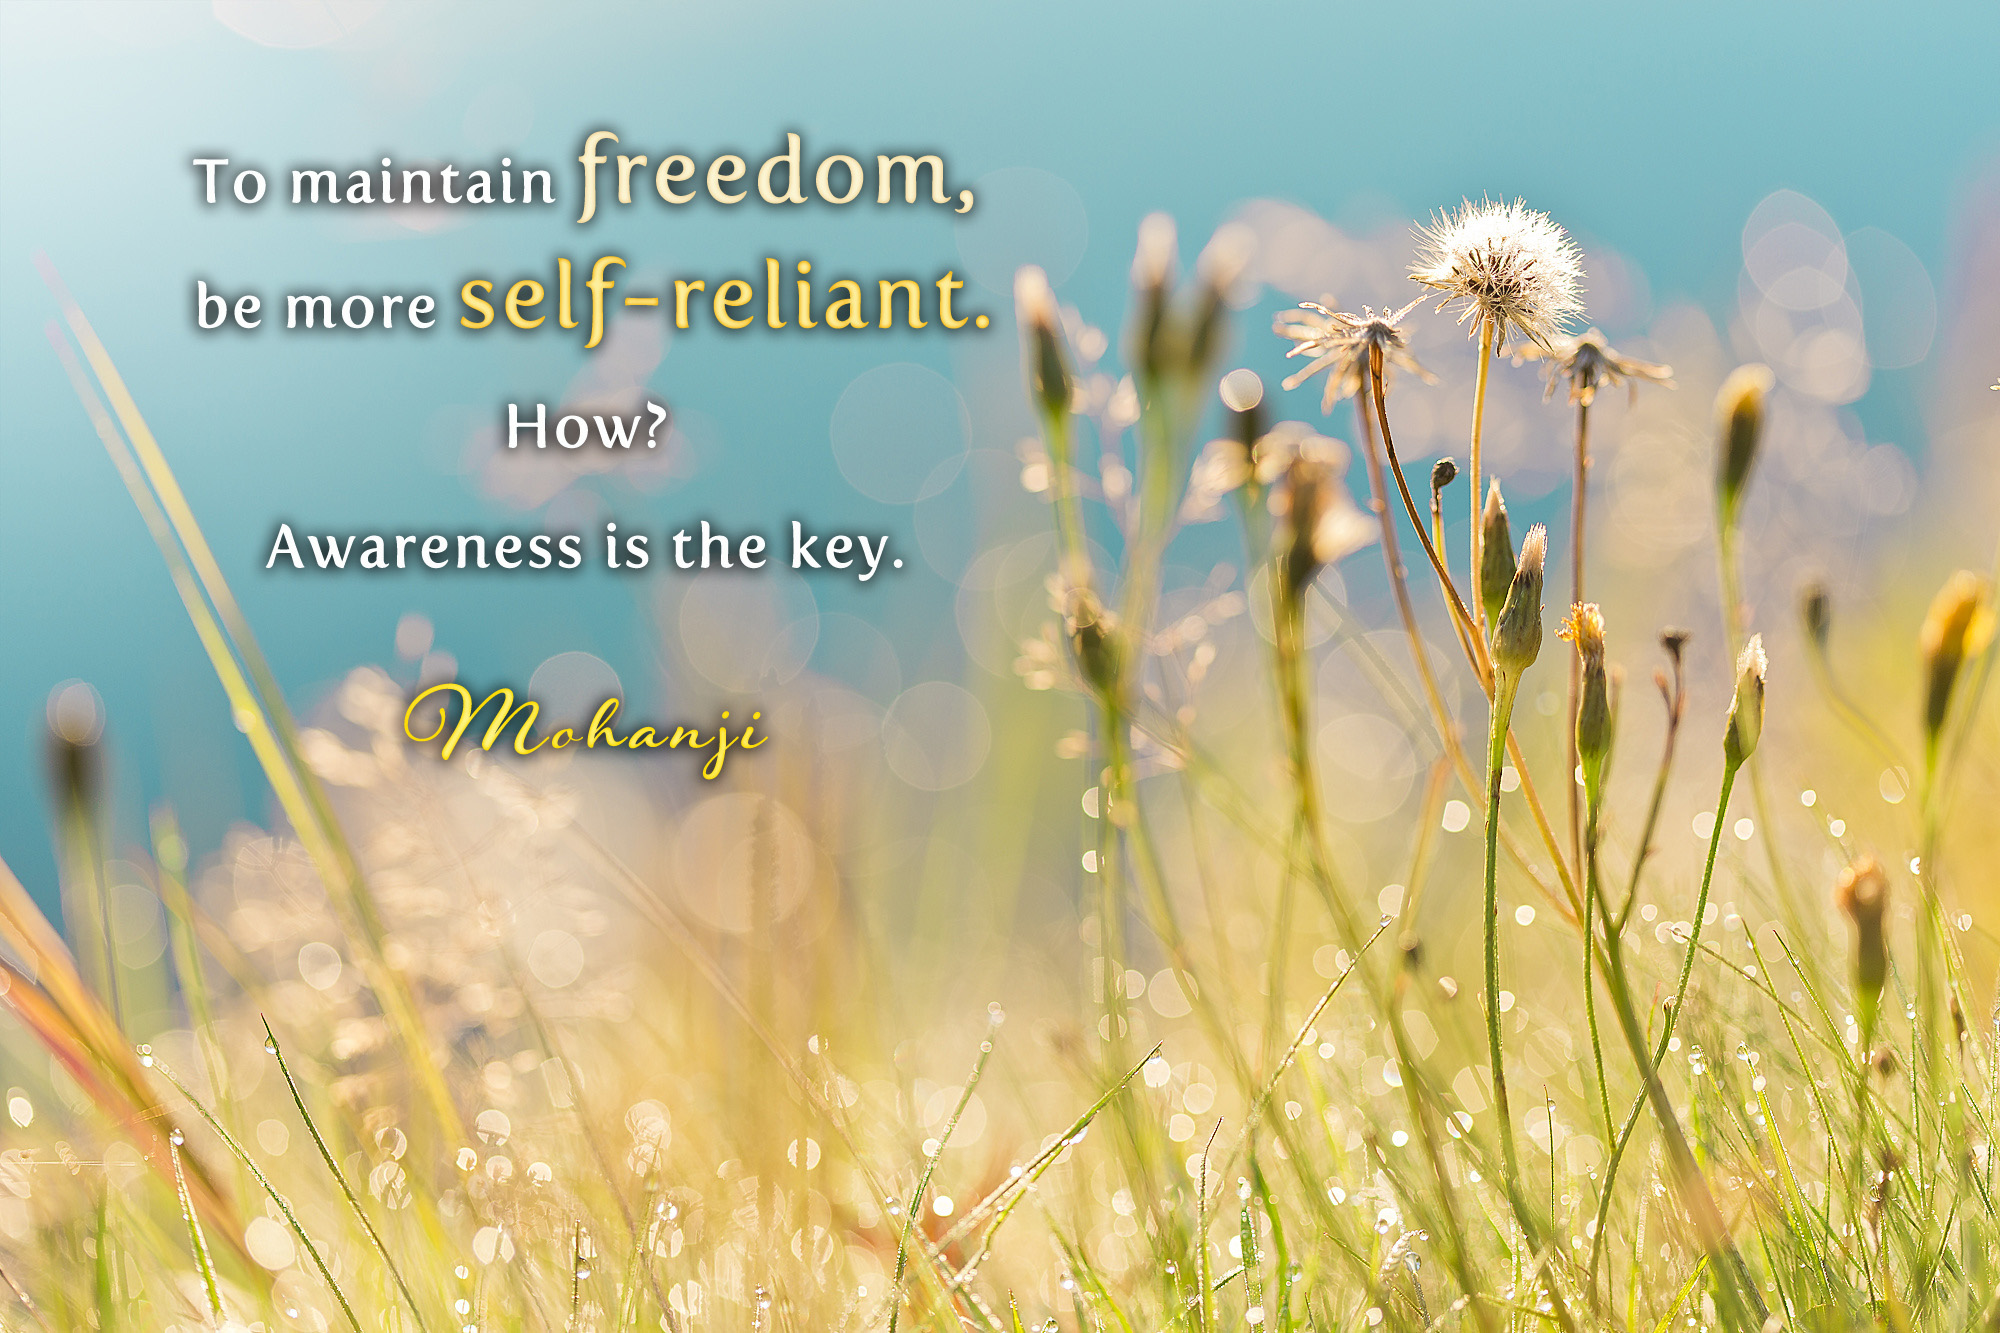 Mohanji quote - To maintain freedom, be more self-reliant